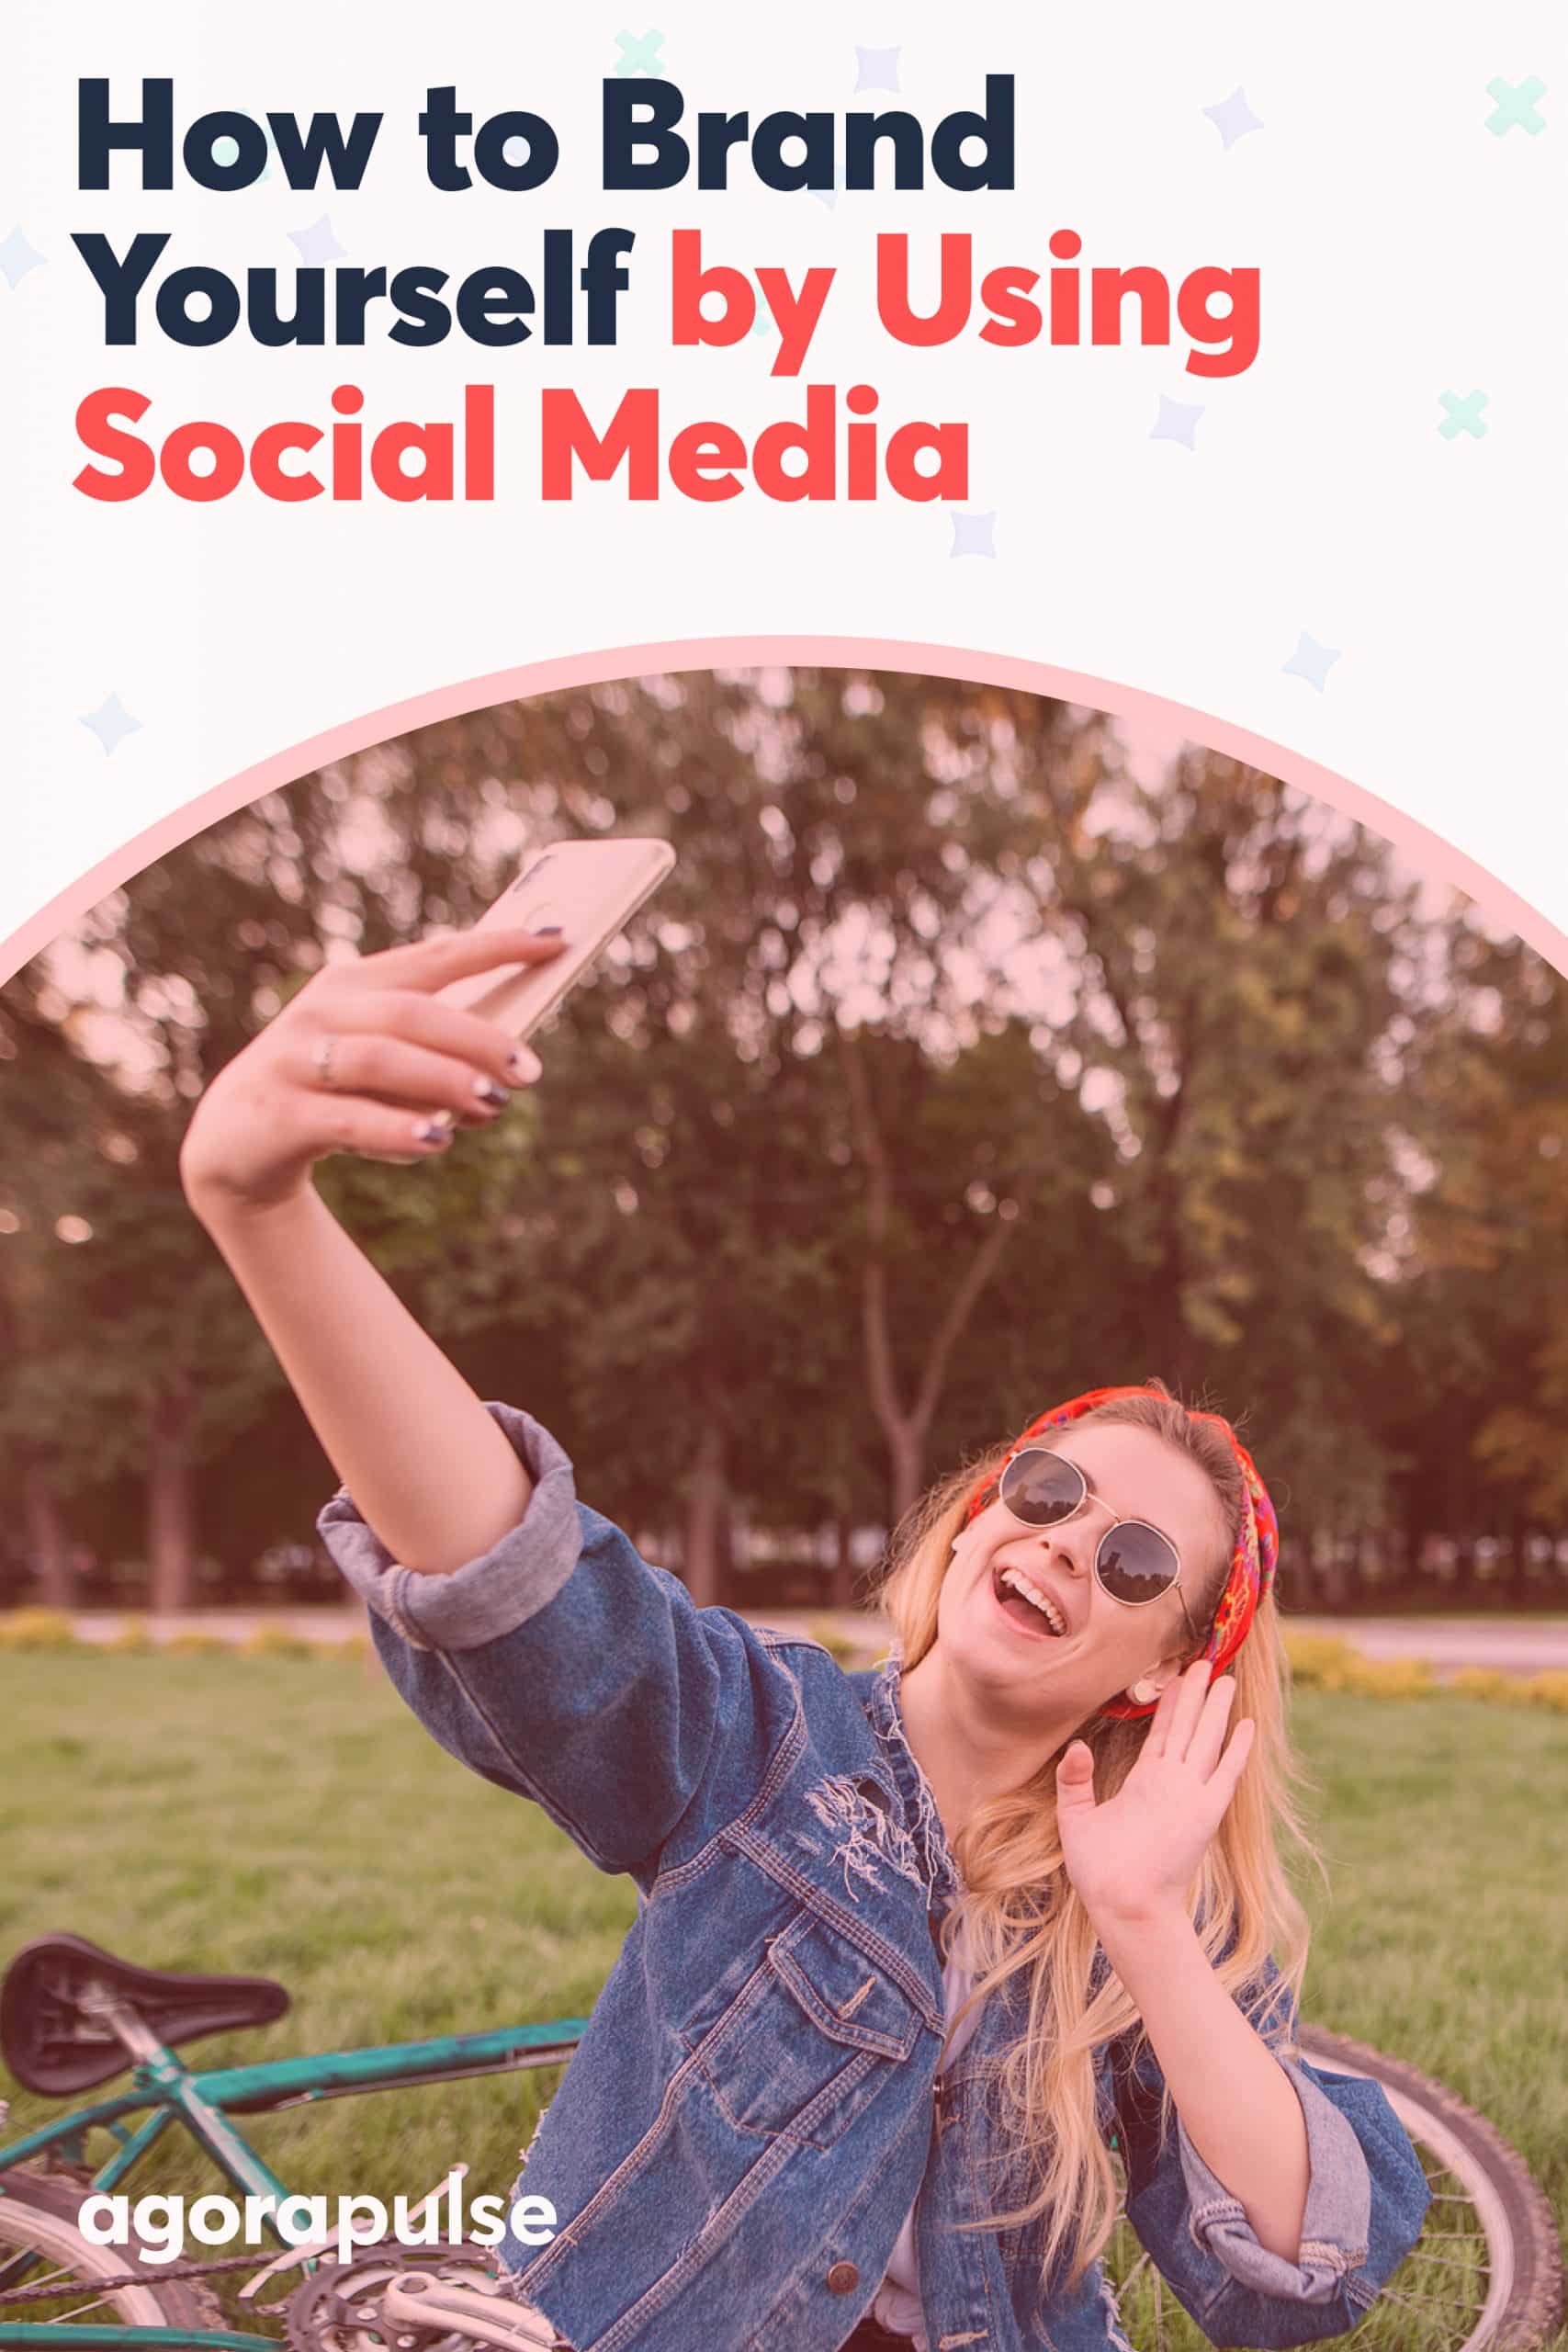 How to Brand Yourself by Using Social Media